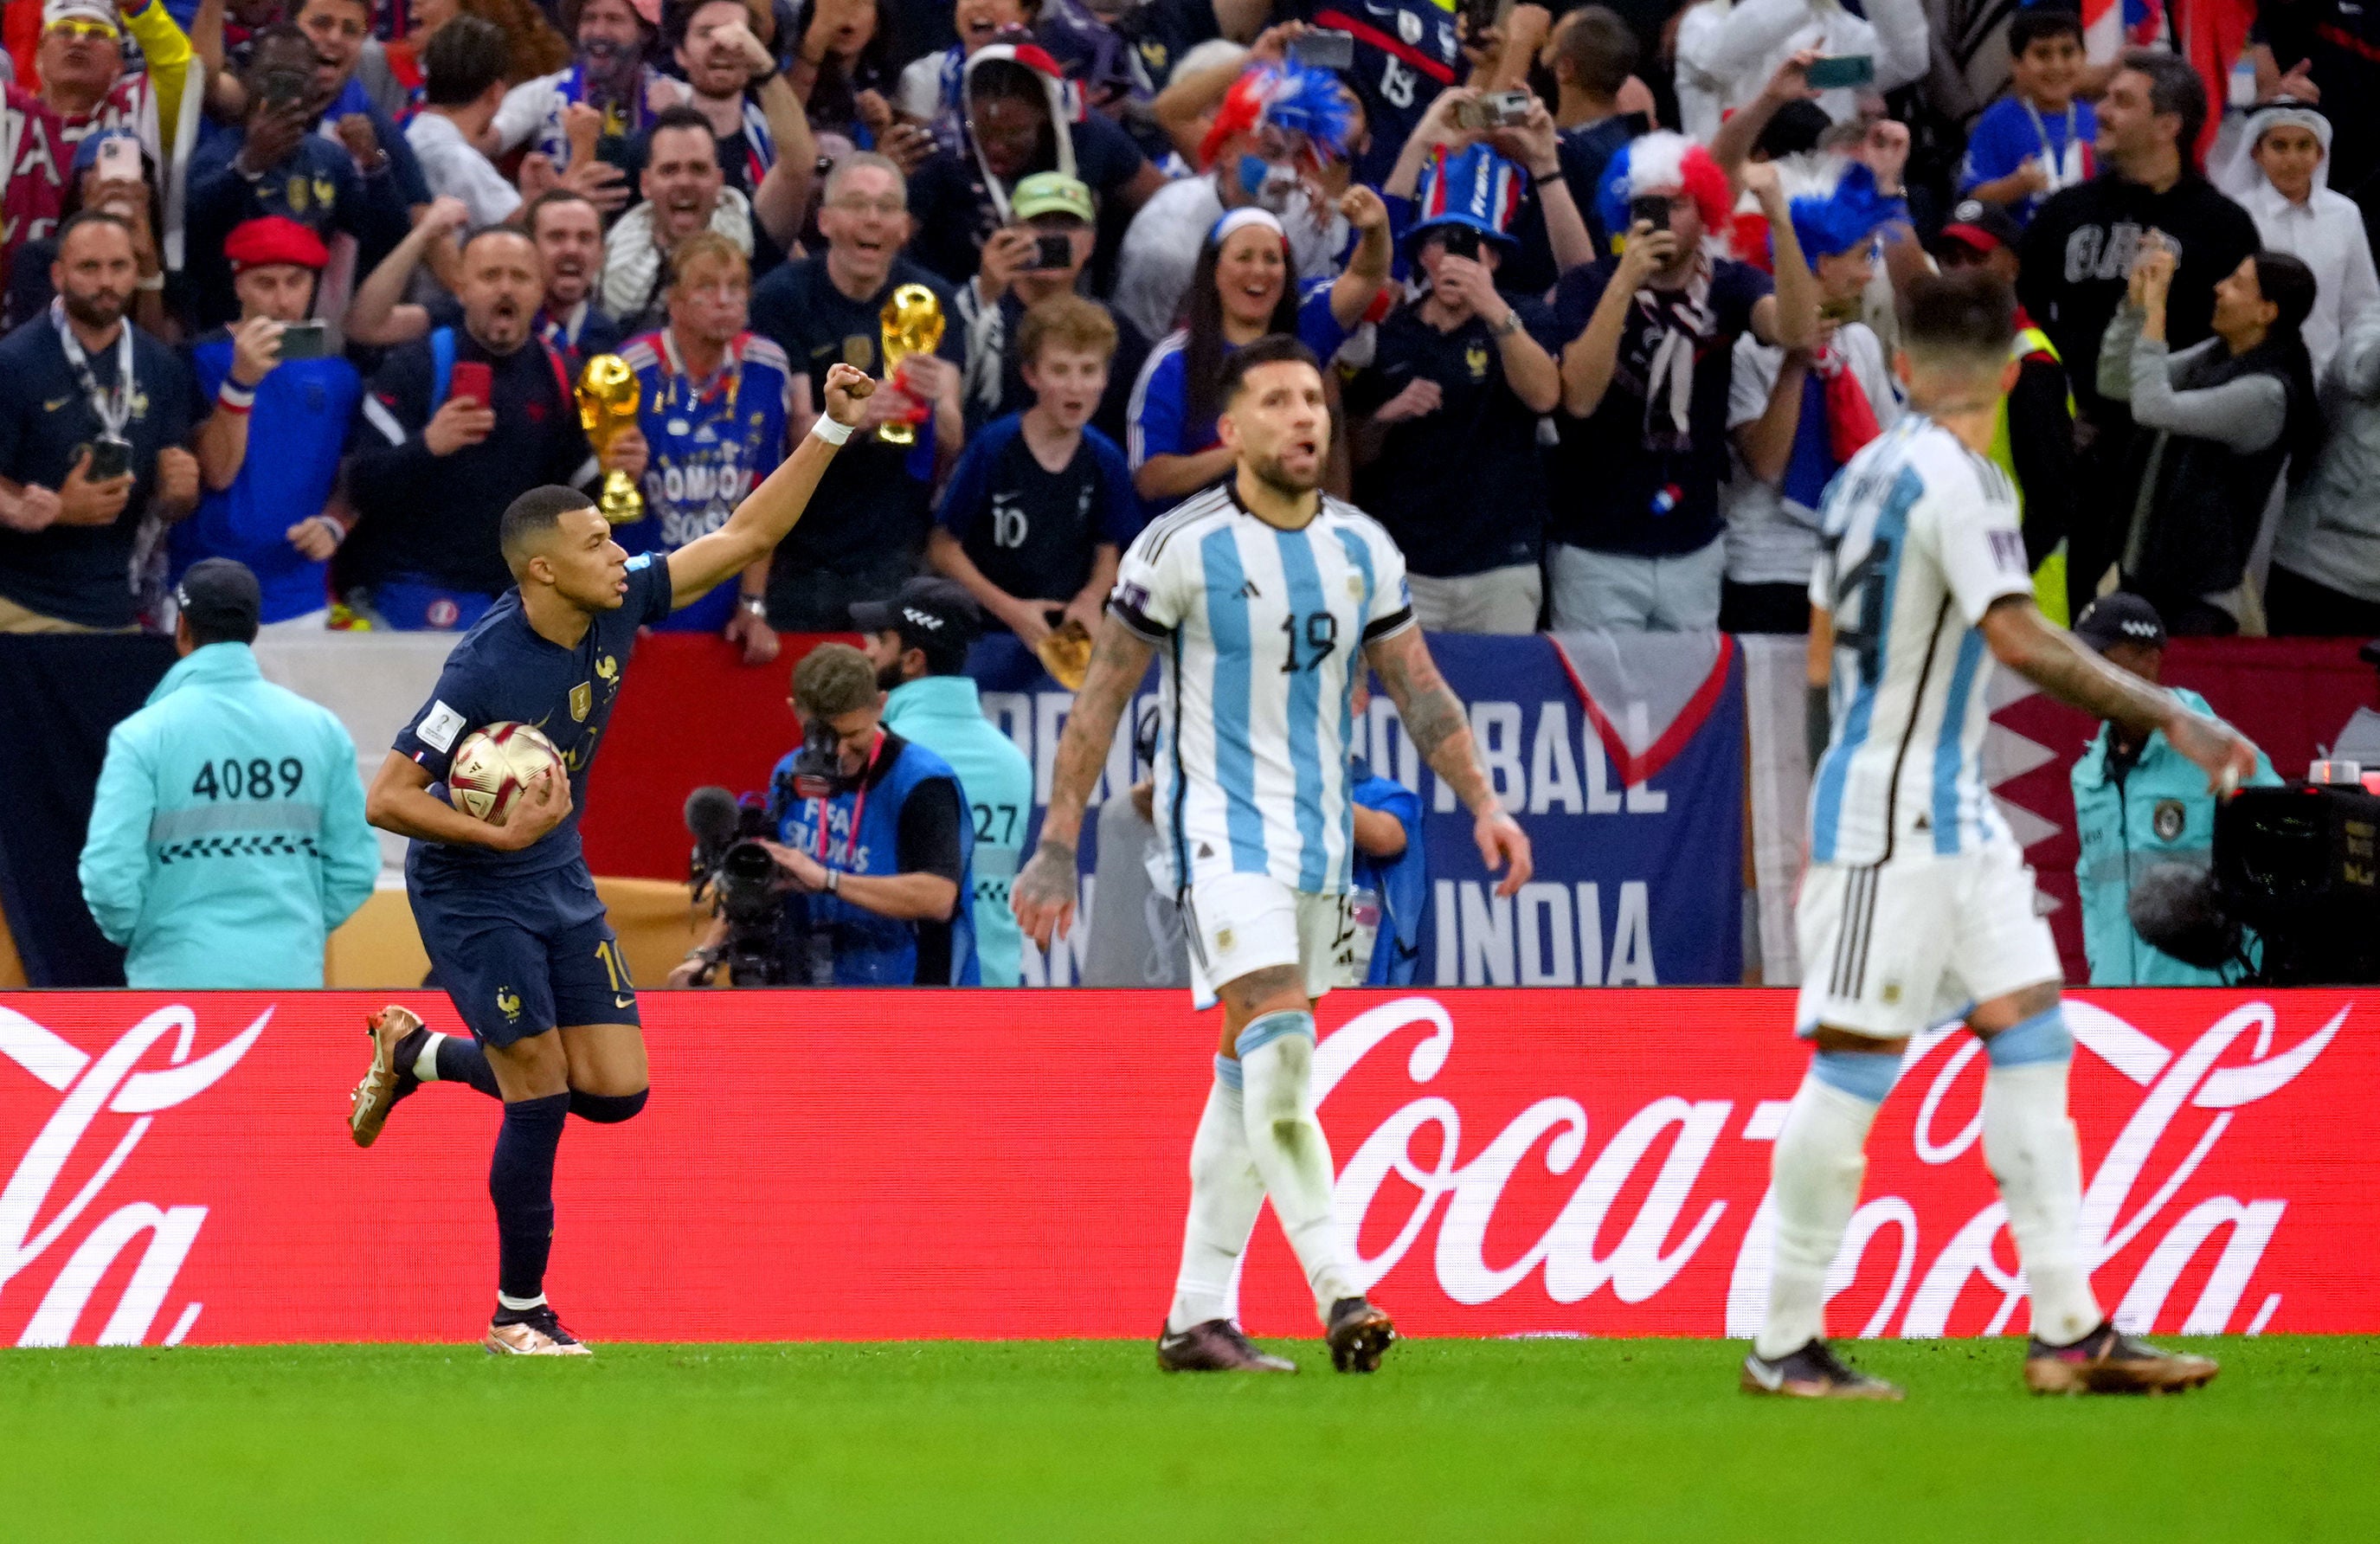 Argentina players look dejected as Mbappe celebrates scoring France’s first goal